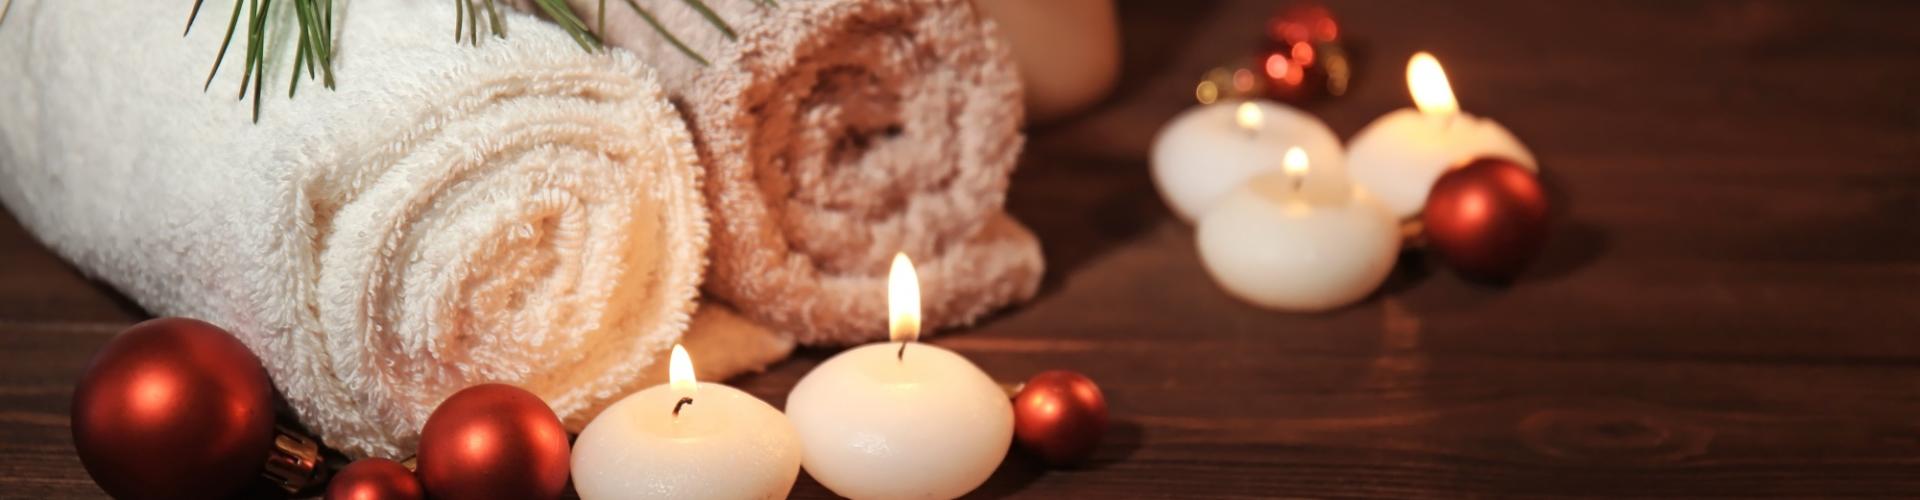 CHRISTMAS AT THE SPA: treatments and entries to the wellness centre are on offer